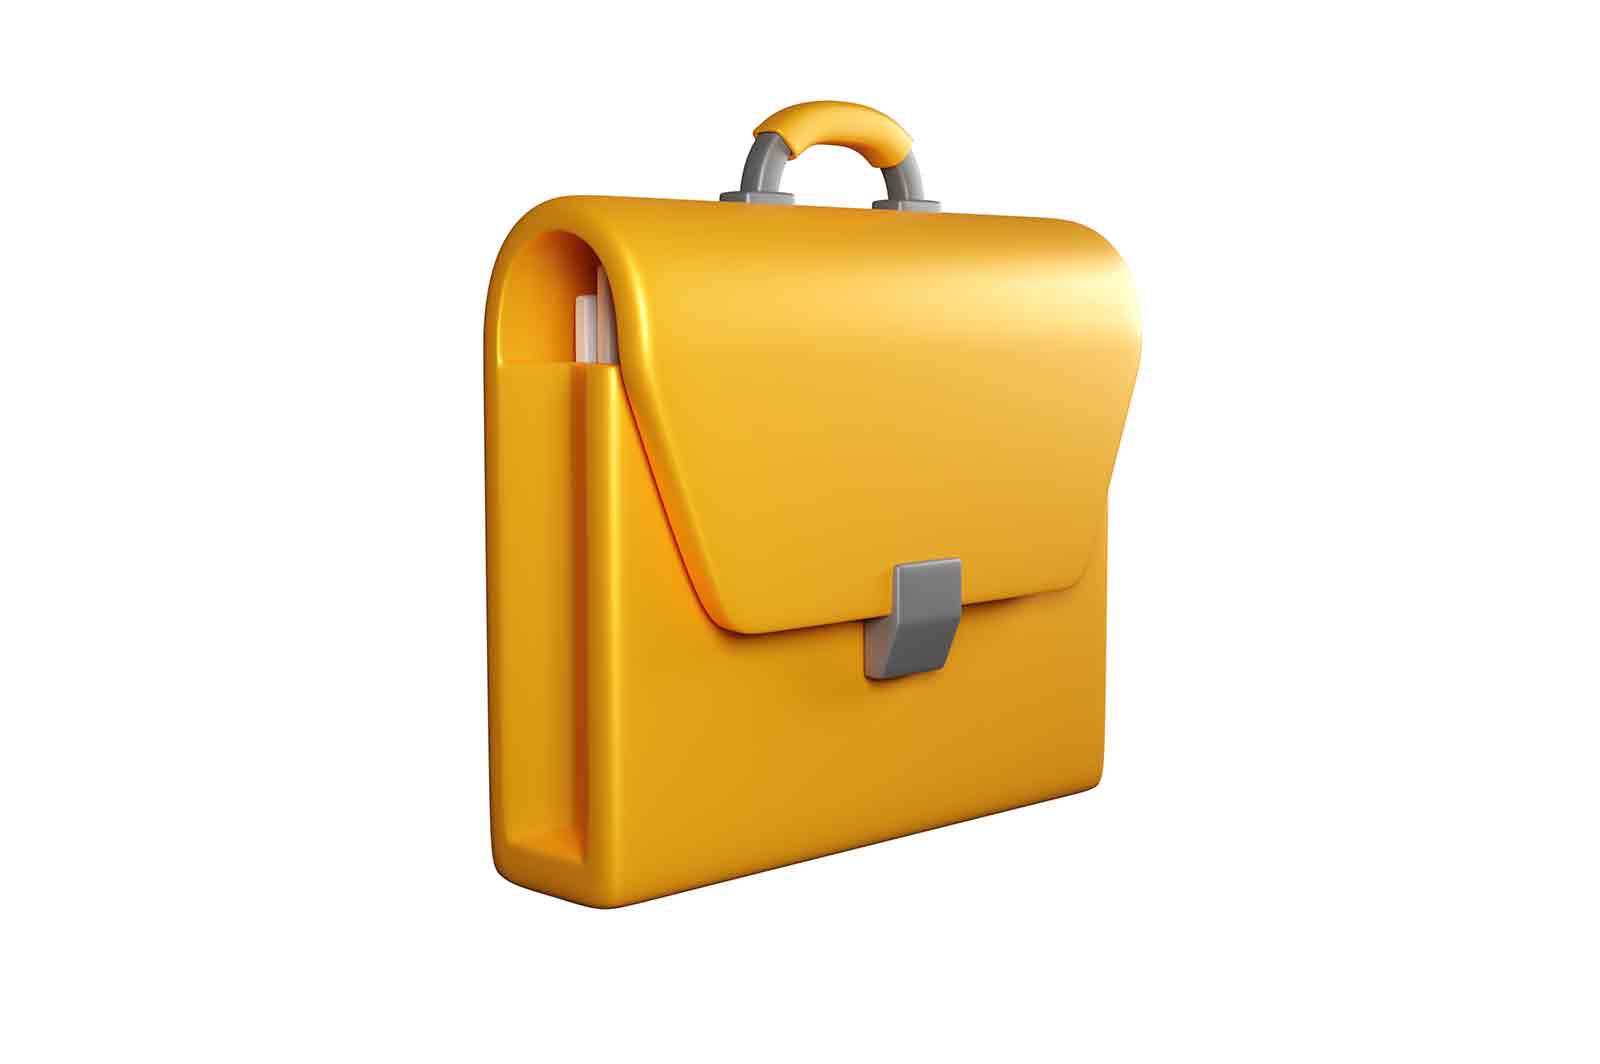 Business briefcase icon for carrying books and papers 3D rendered illustration. Schoolbag or brief-bag.